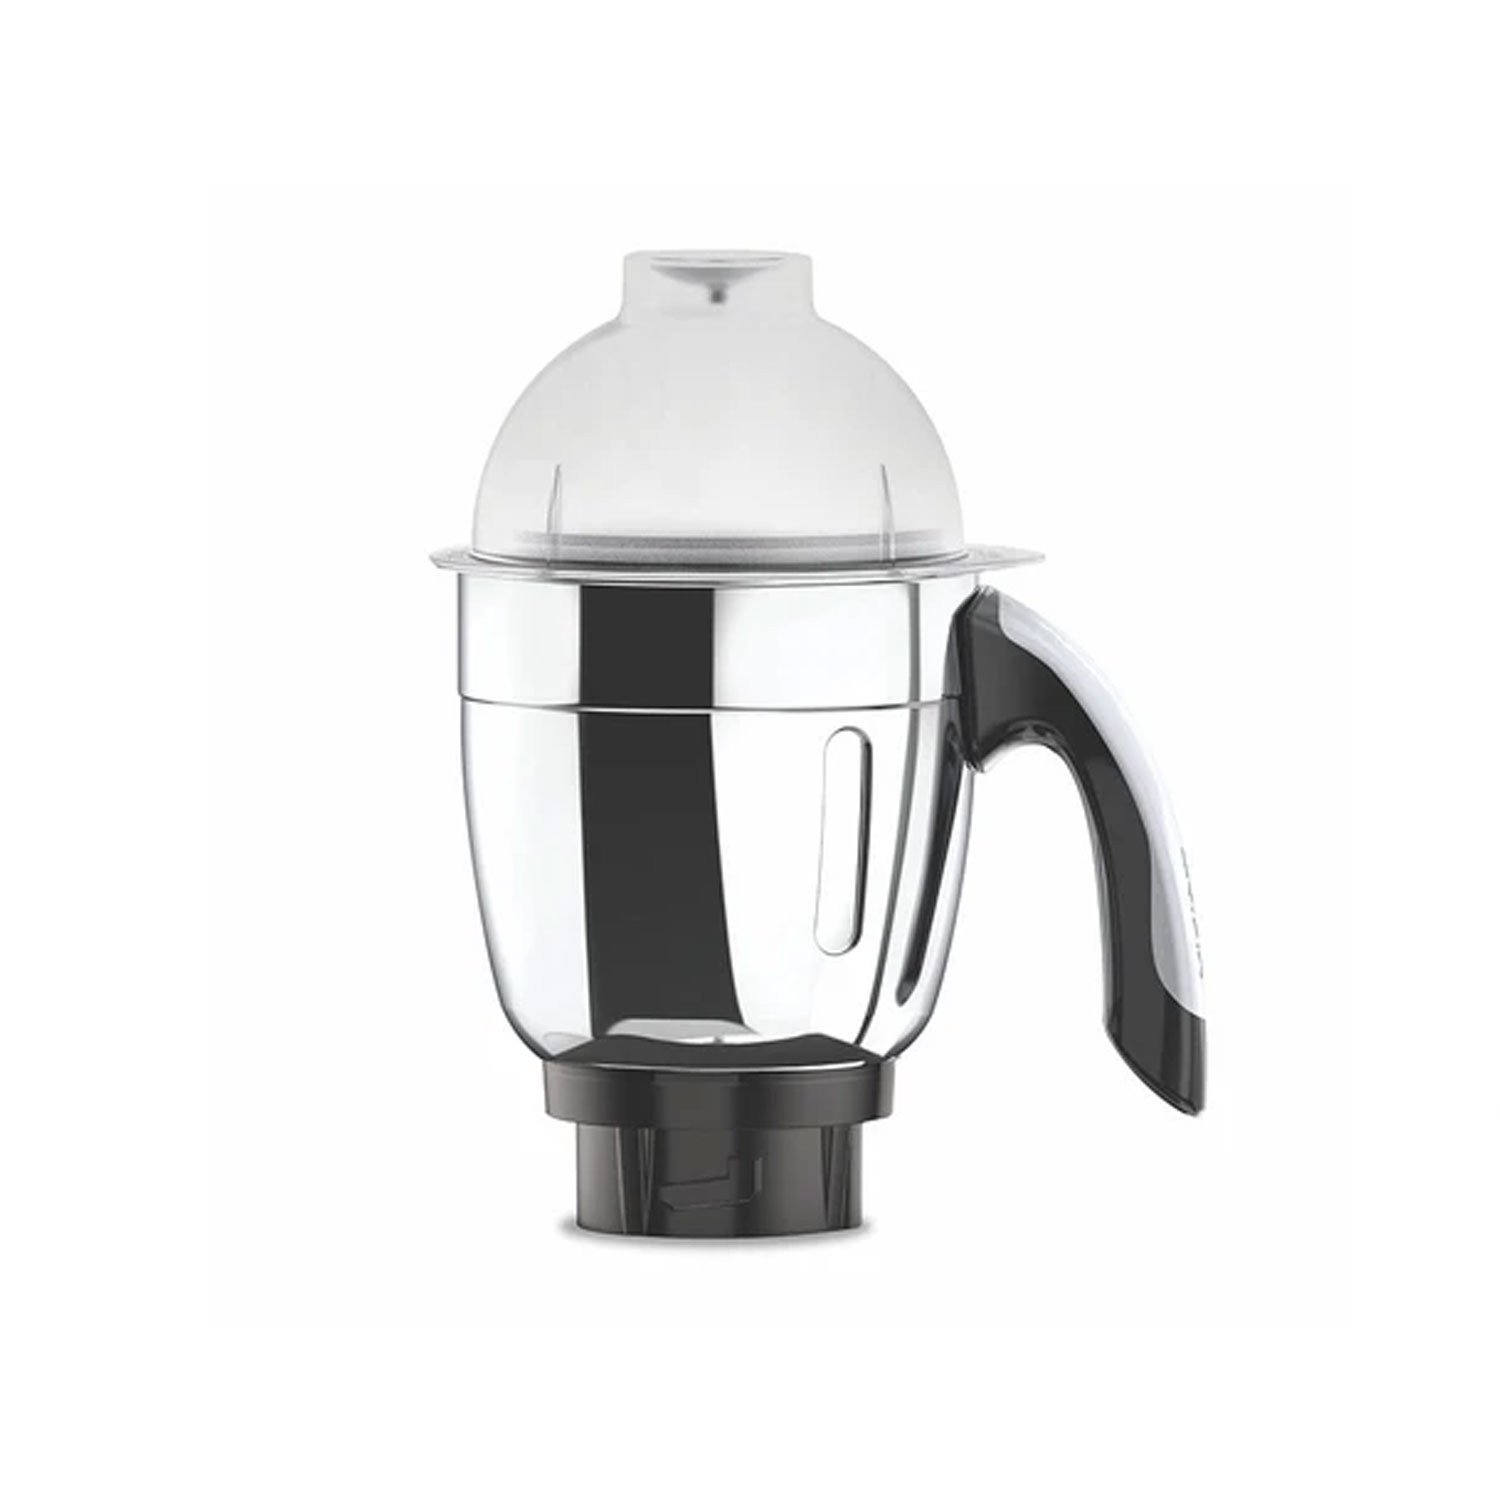 vidiem-vision-plus-650w-stainless-steel-jars-indian-mixer-grinder-with-almond-nut-milk-juice-extractor-spice-coffee-grinder-jar-110v-for-use-in-canada-usa9